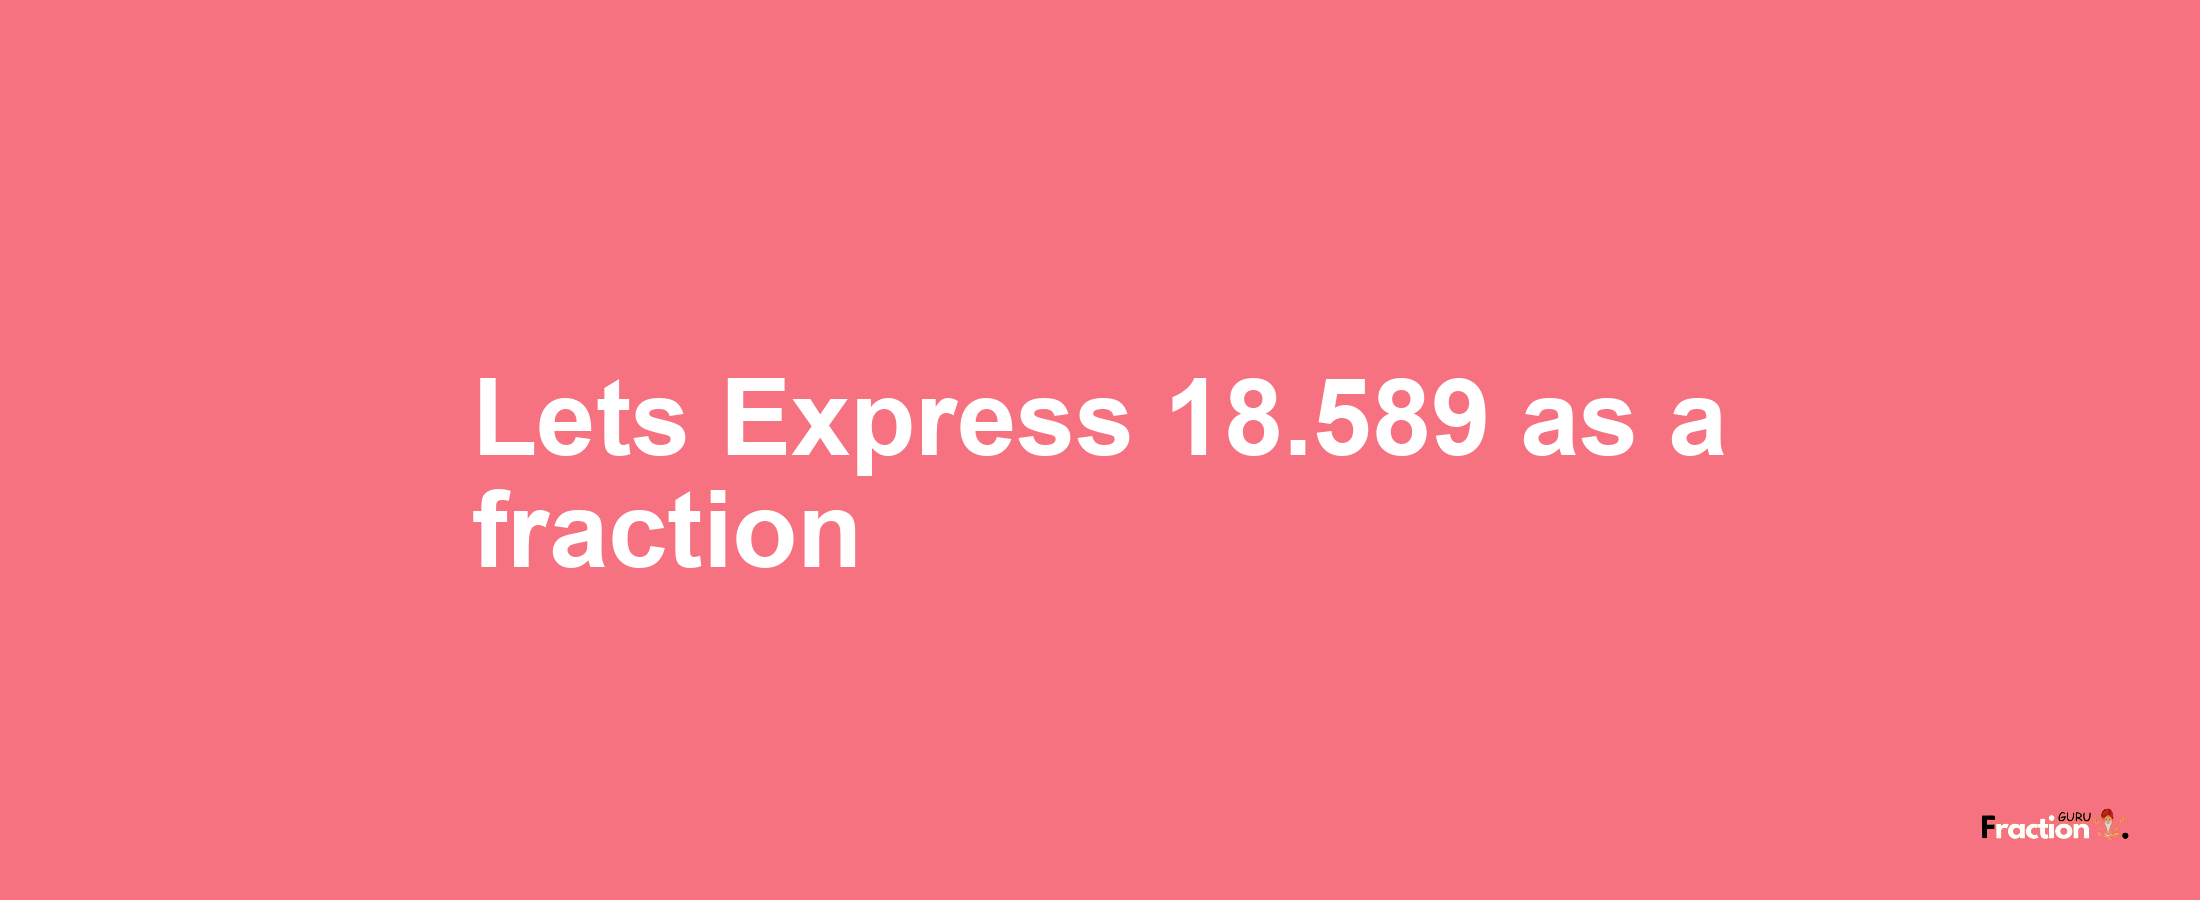 Lets Express 18.589 as afraction